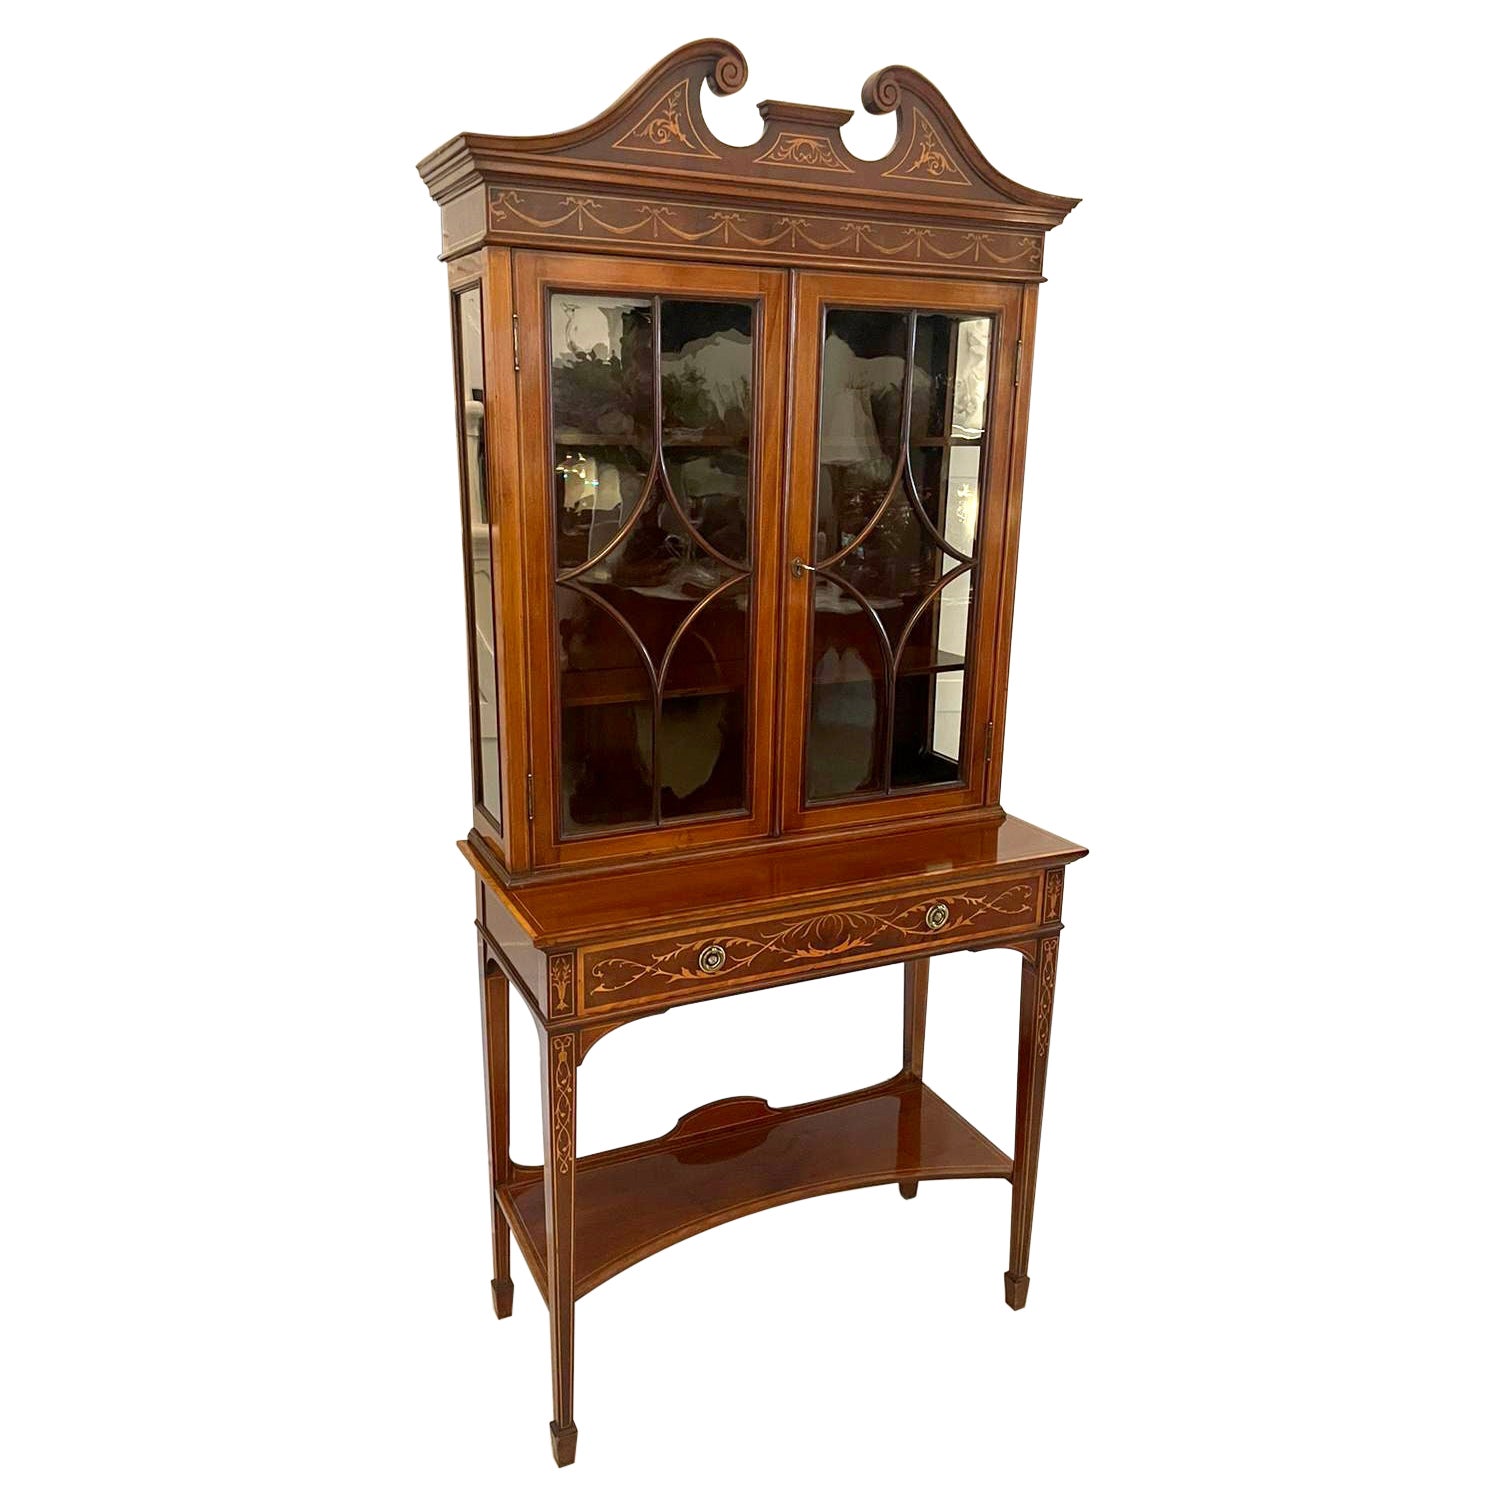 Quality Antique Mahogany Inlaid Display Cabinet by Edwards & Roberts, London